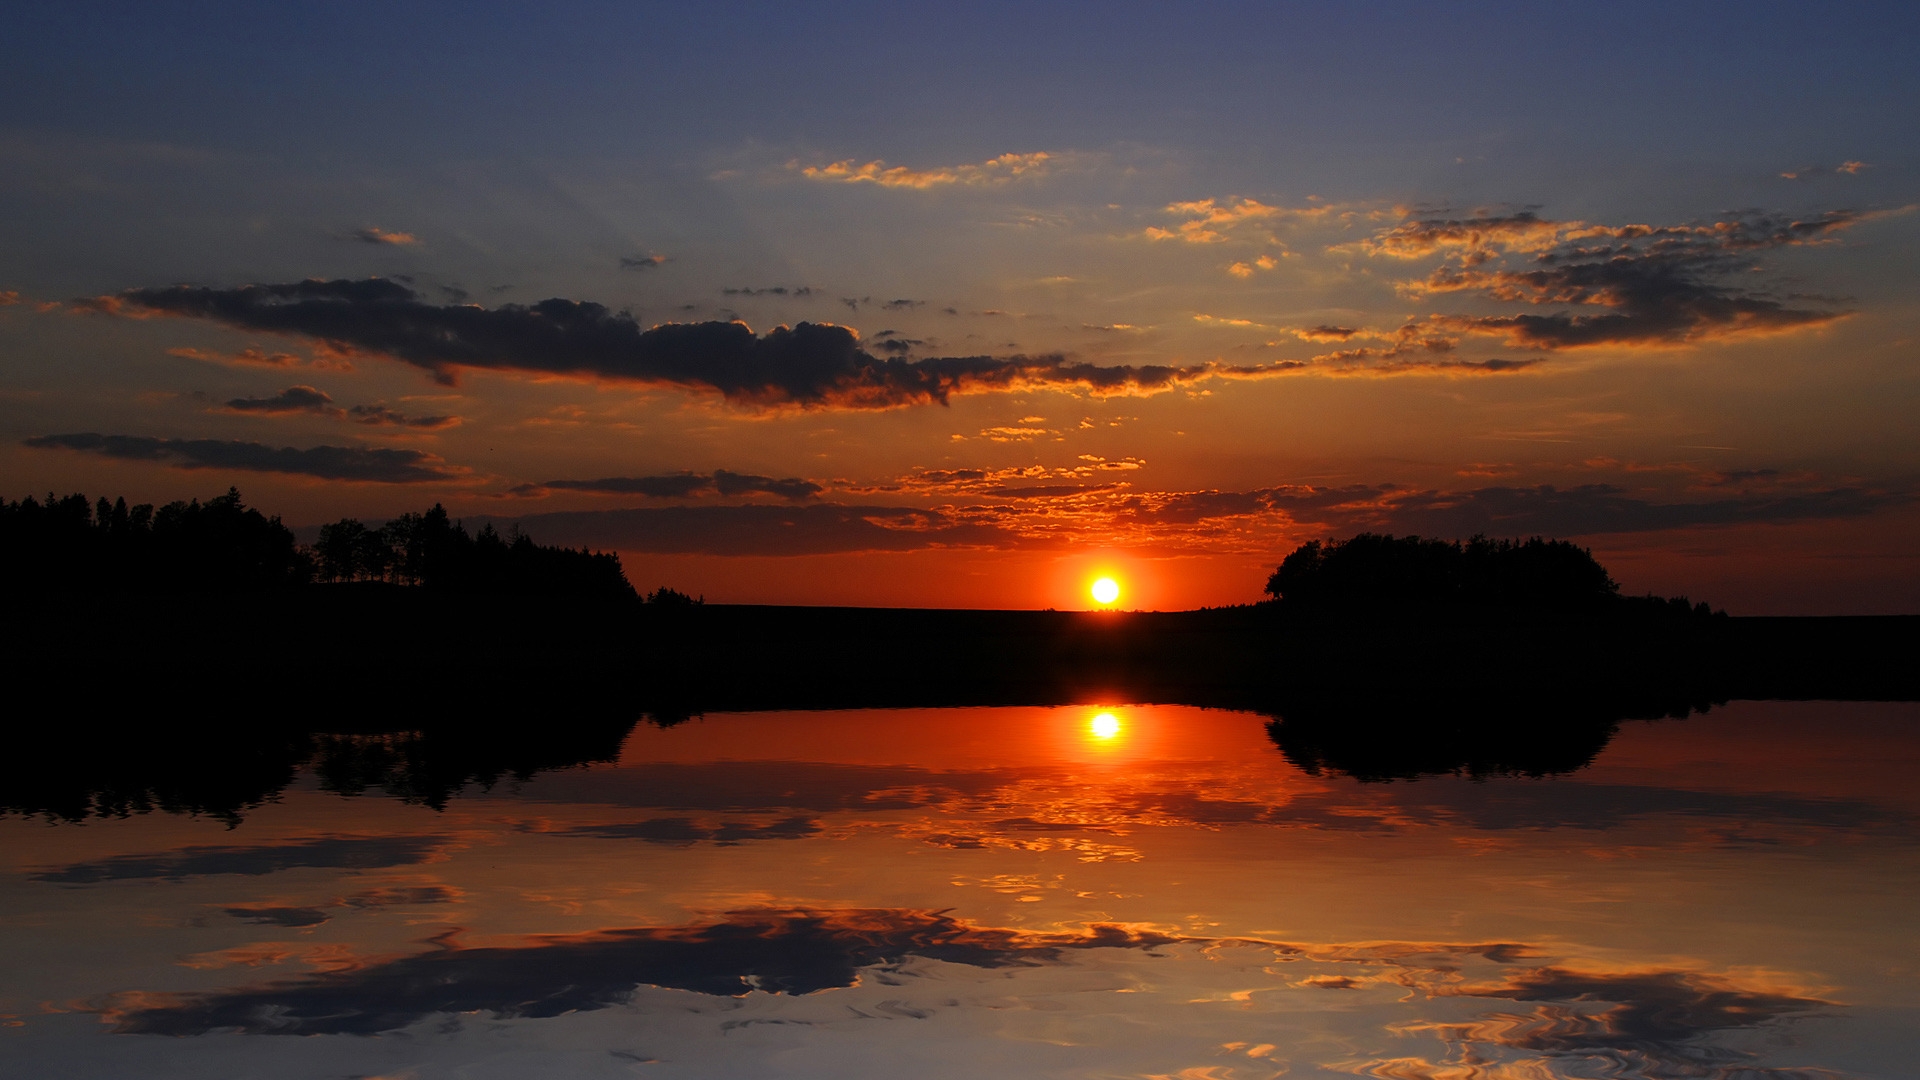 Reflection during Sunset for 1920 x 1080 HDTV 1080p resolution